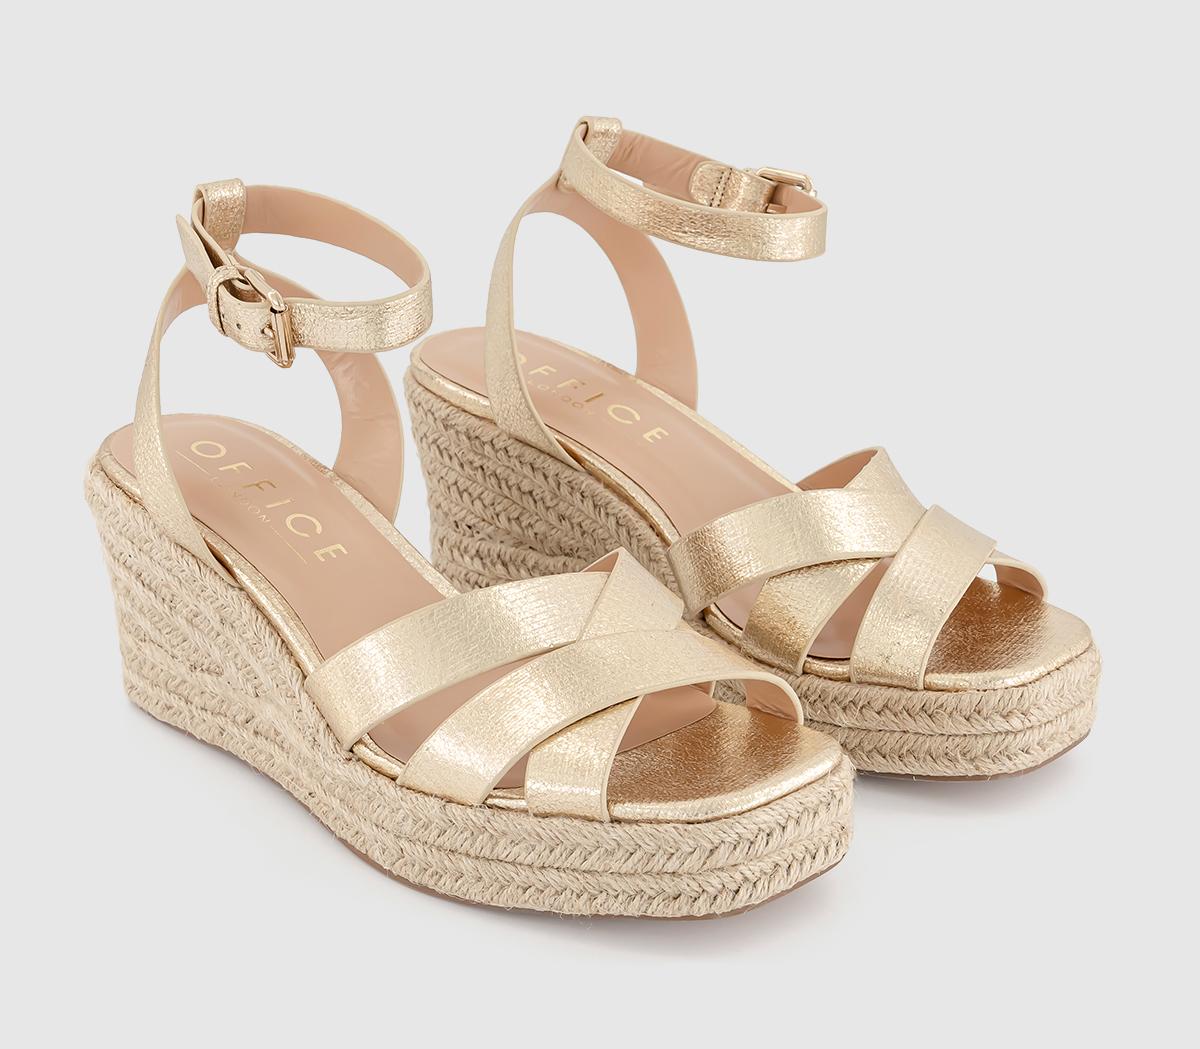 OFFICE Womens Martina Multi Strap Mid Espadrille Wedges Gold, 5